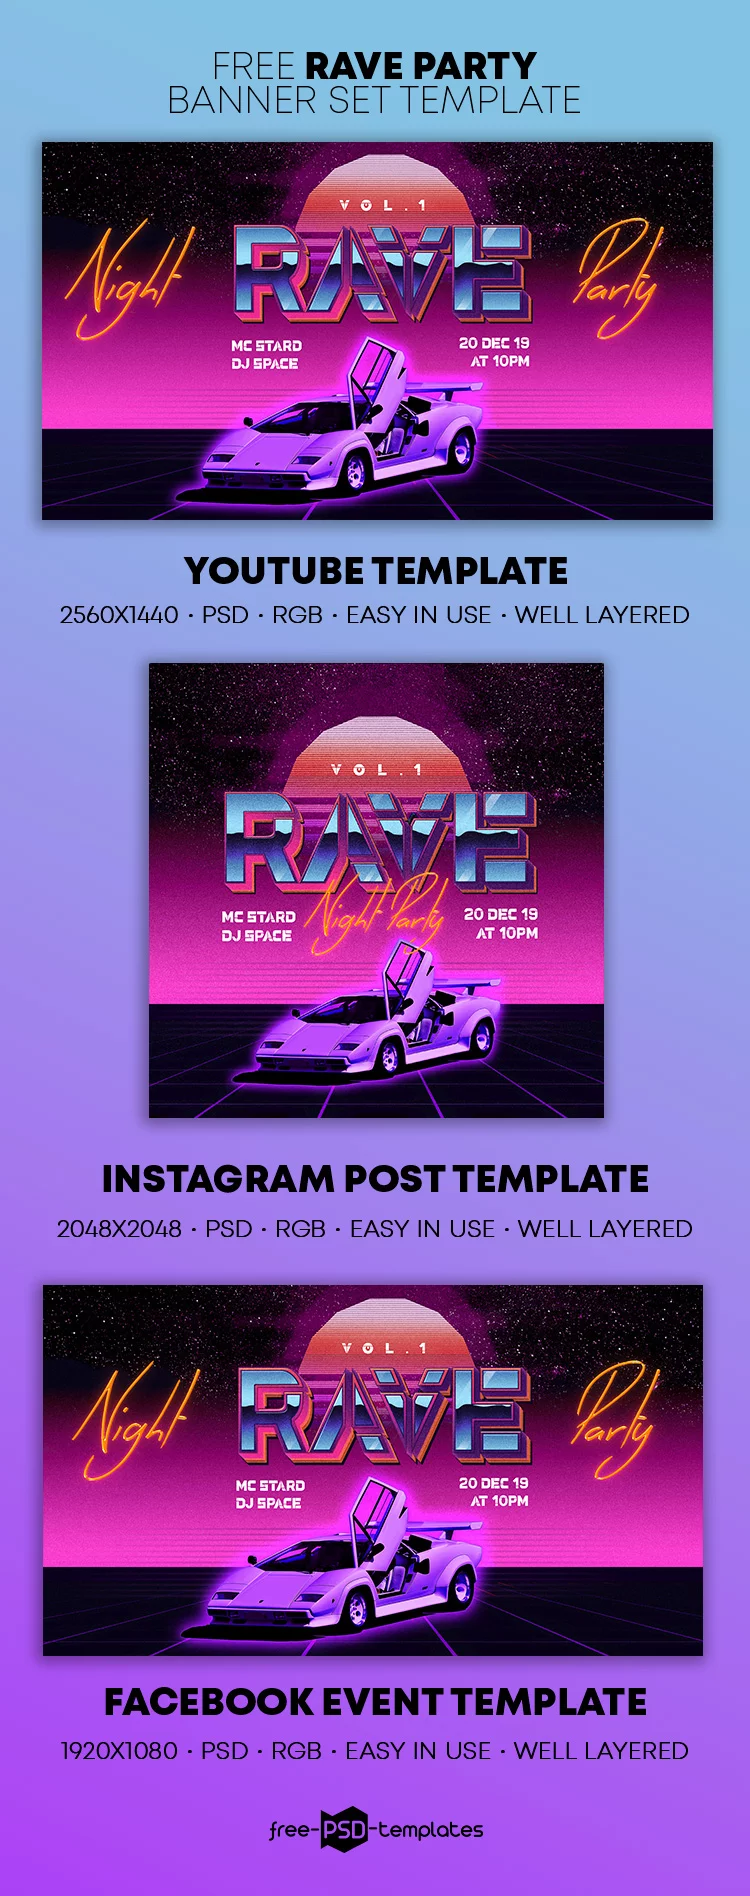 Free Rave Party Banner Set Template